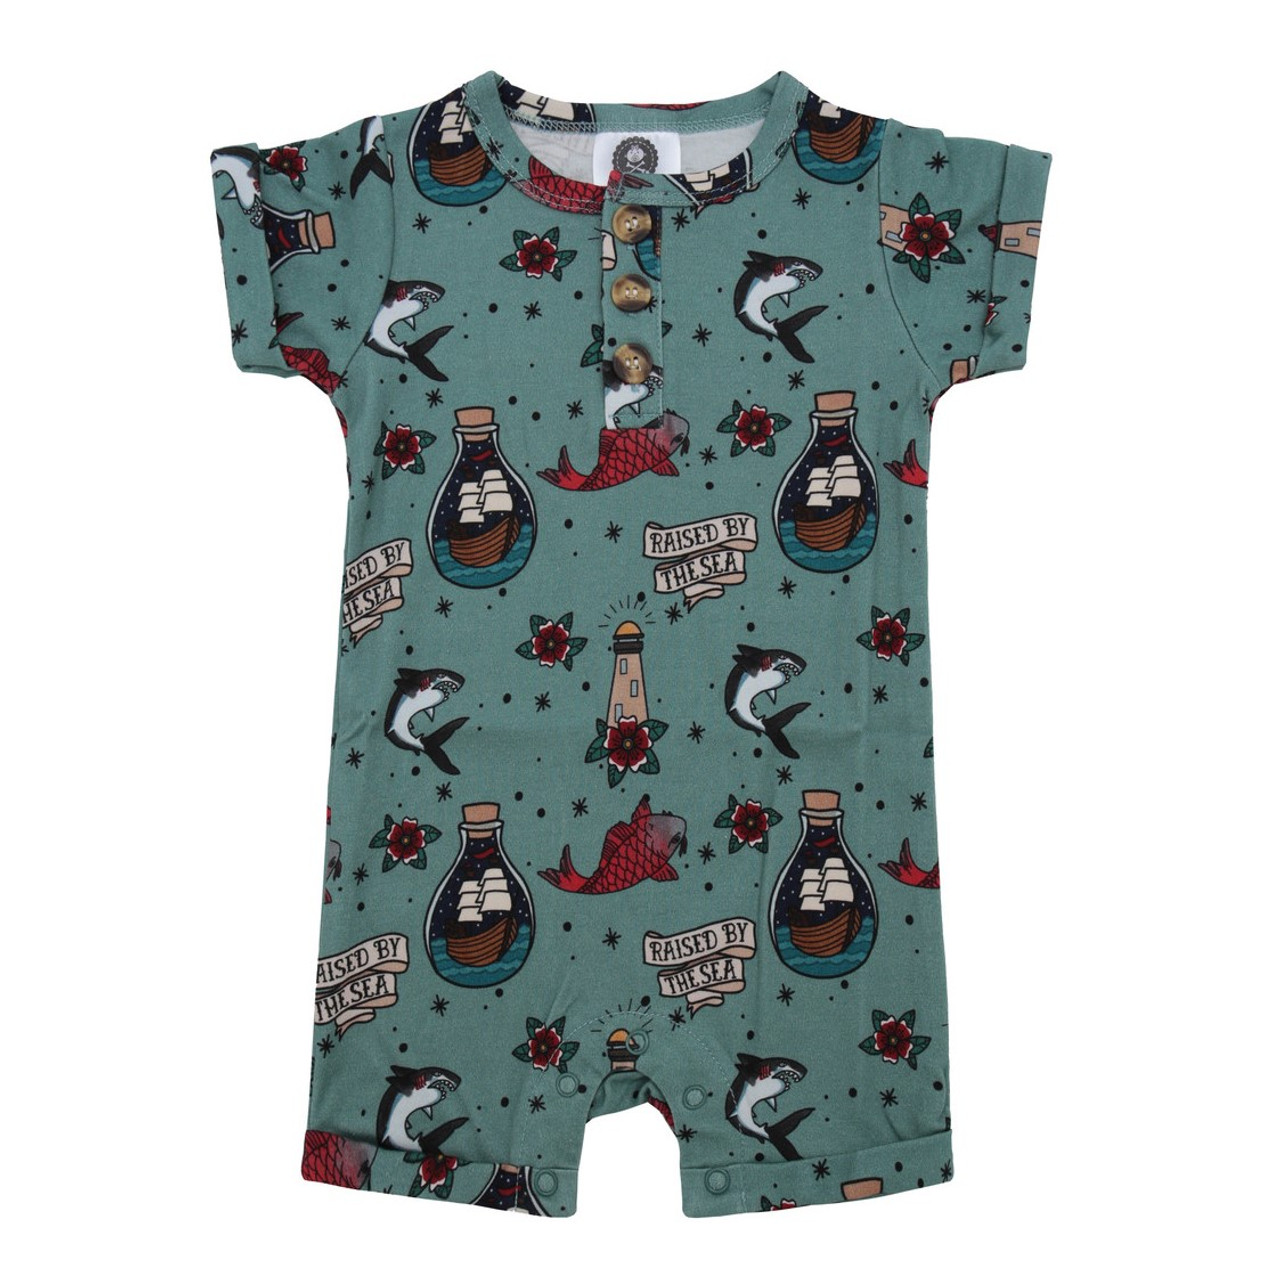 Metallimonsters - Alternative Baby Clothes